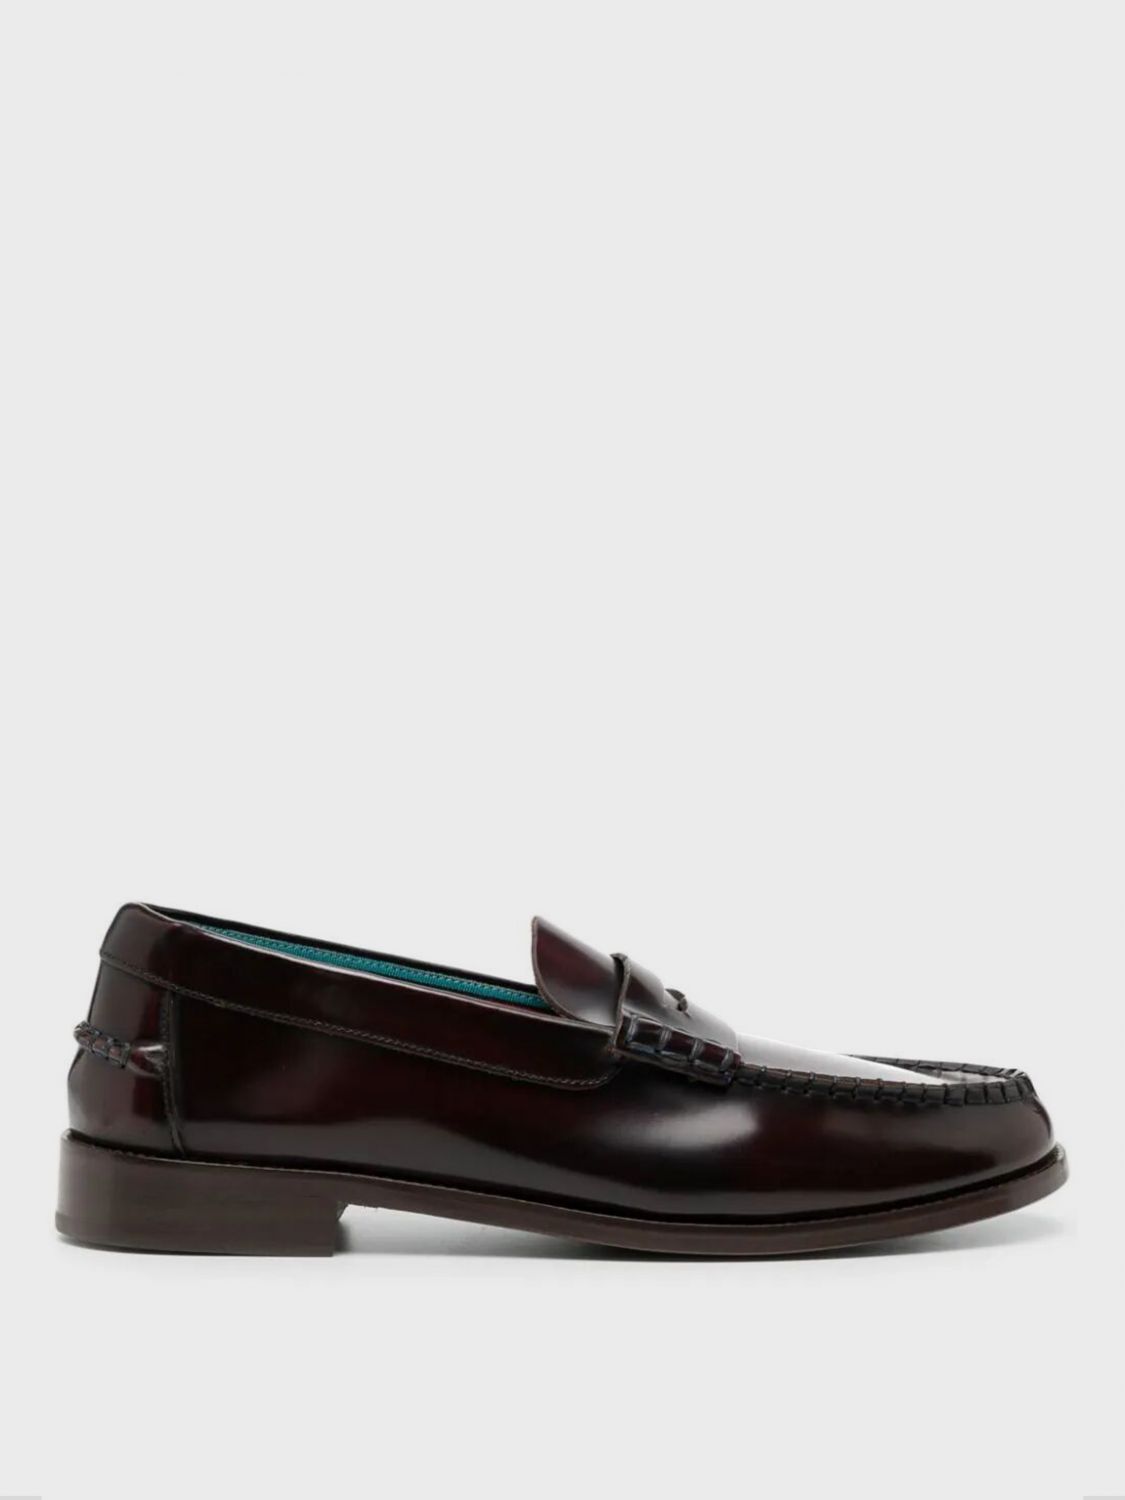 Paul Smith Loafers PAUL SMITH Men color Burgundy